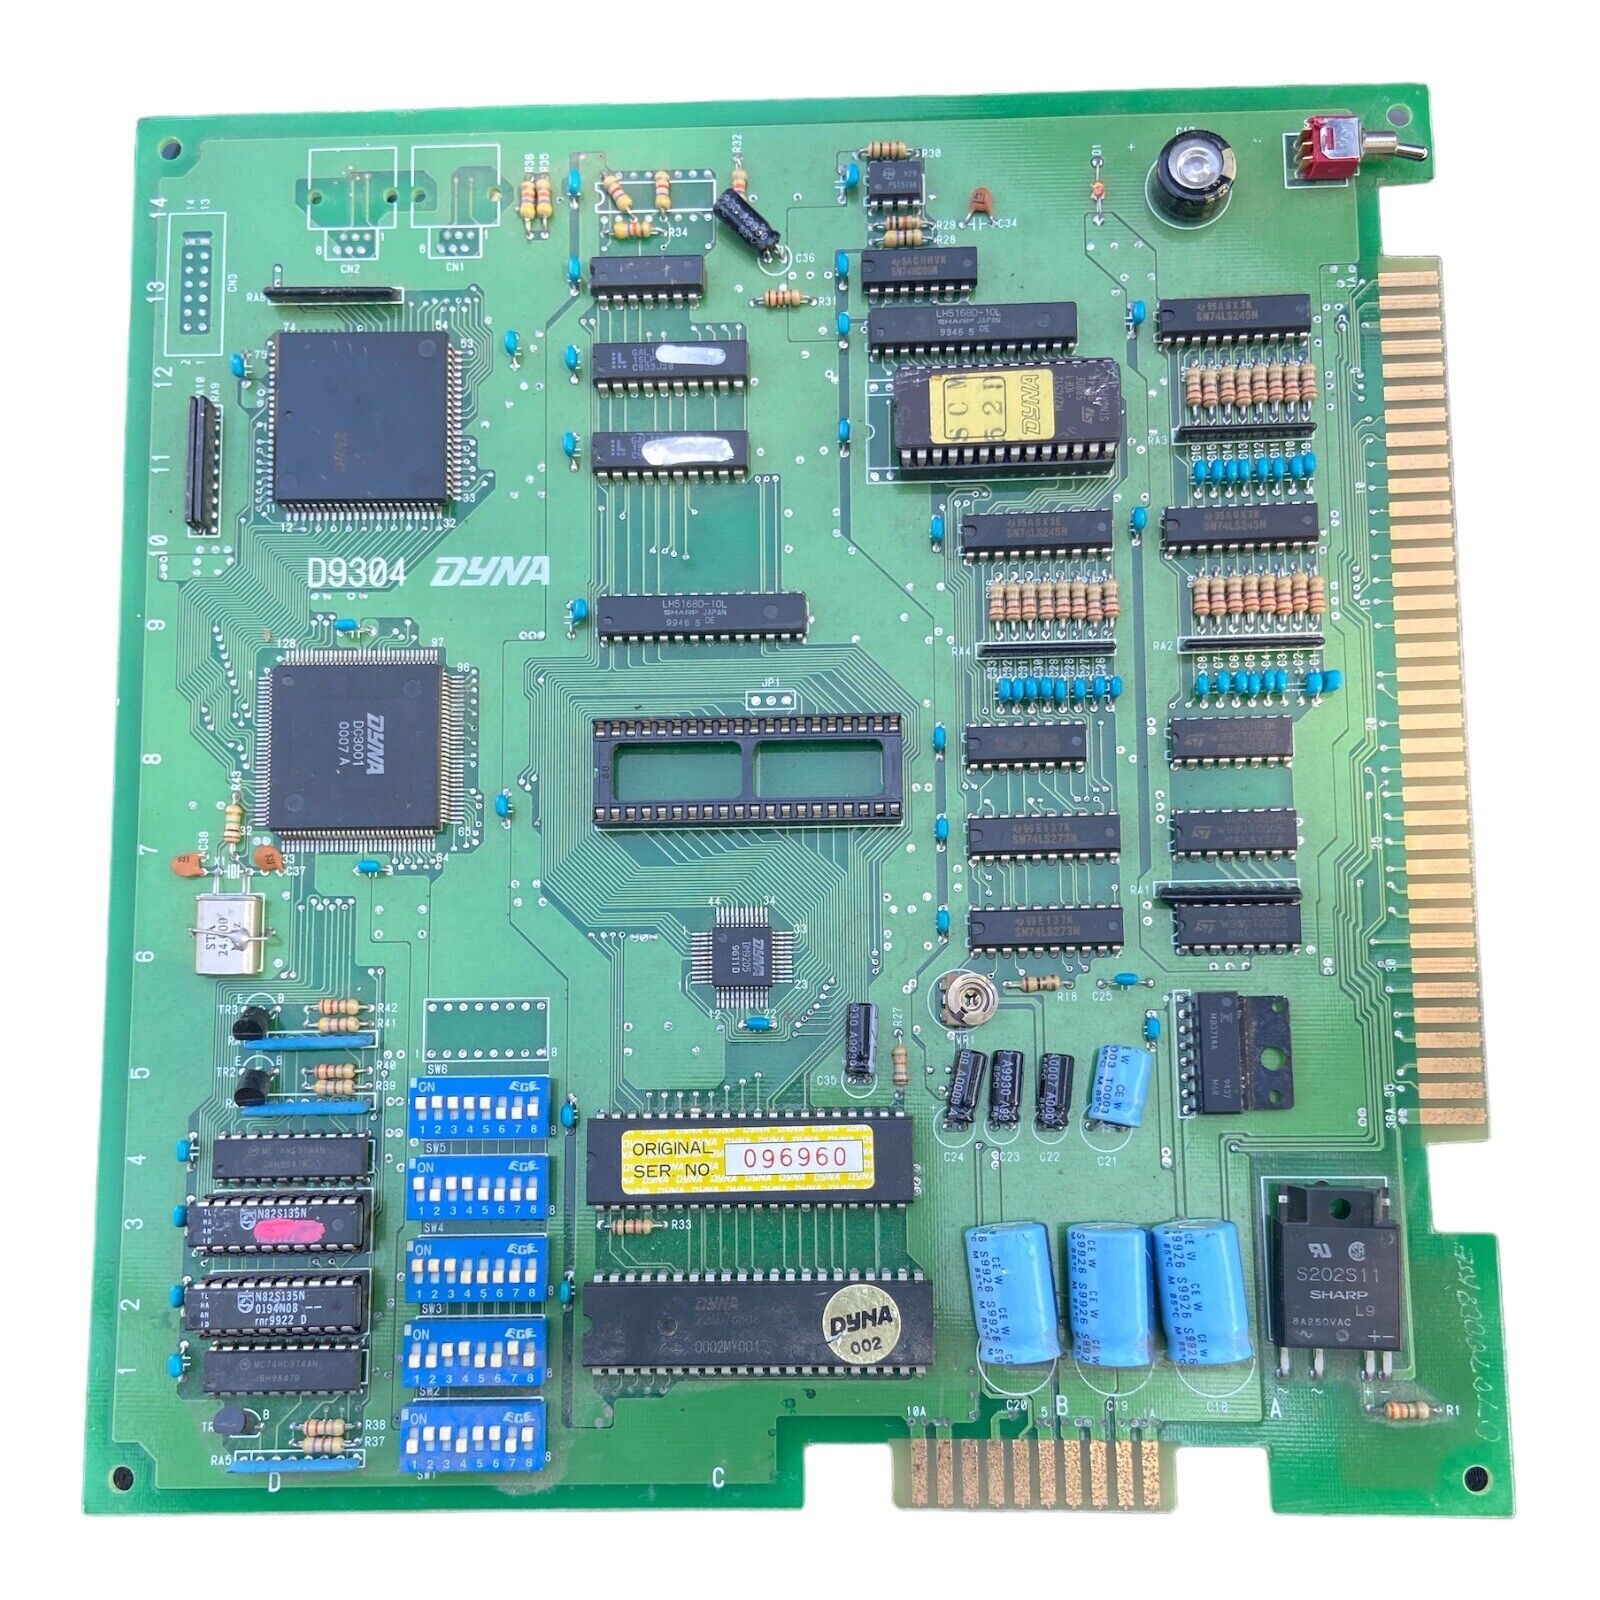 Super Cherry Master BY DYNA D9304 8LINER  CGA Rare PCB